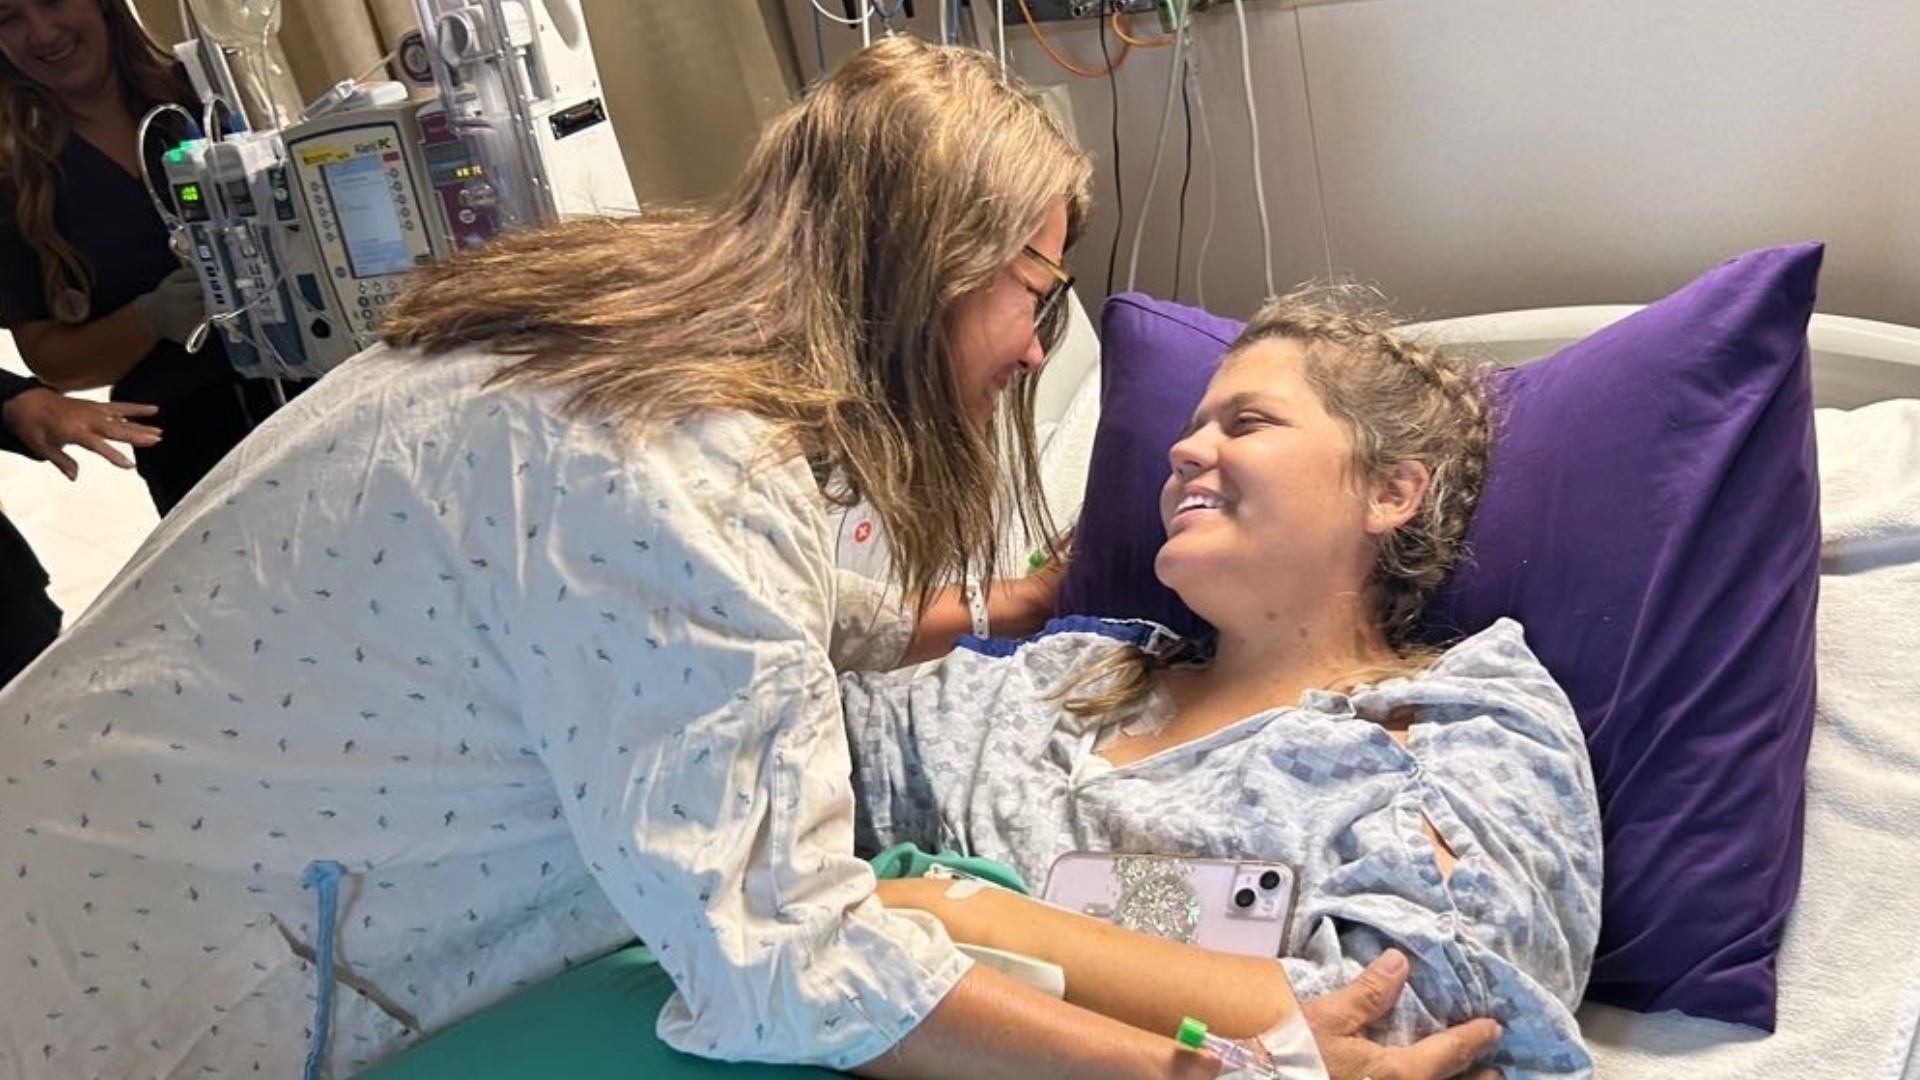 Four people volunteered to donate a kidney to Anna Harlow, but her mother Sheri turned out to be the right match.